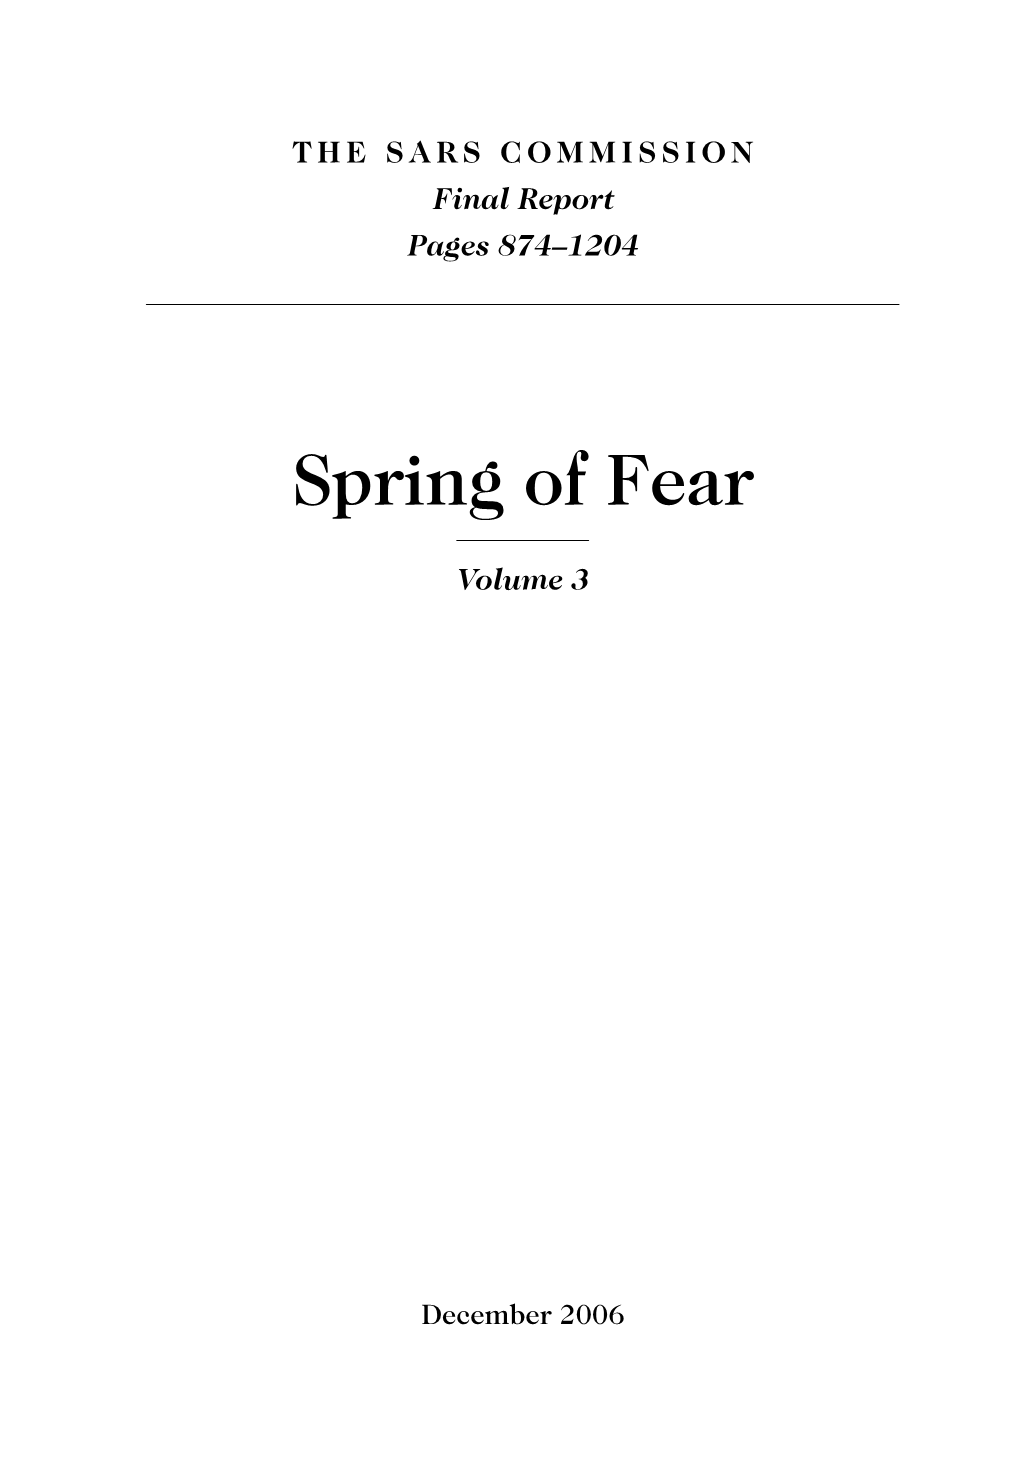 Spring of Fear